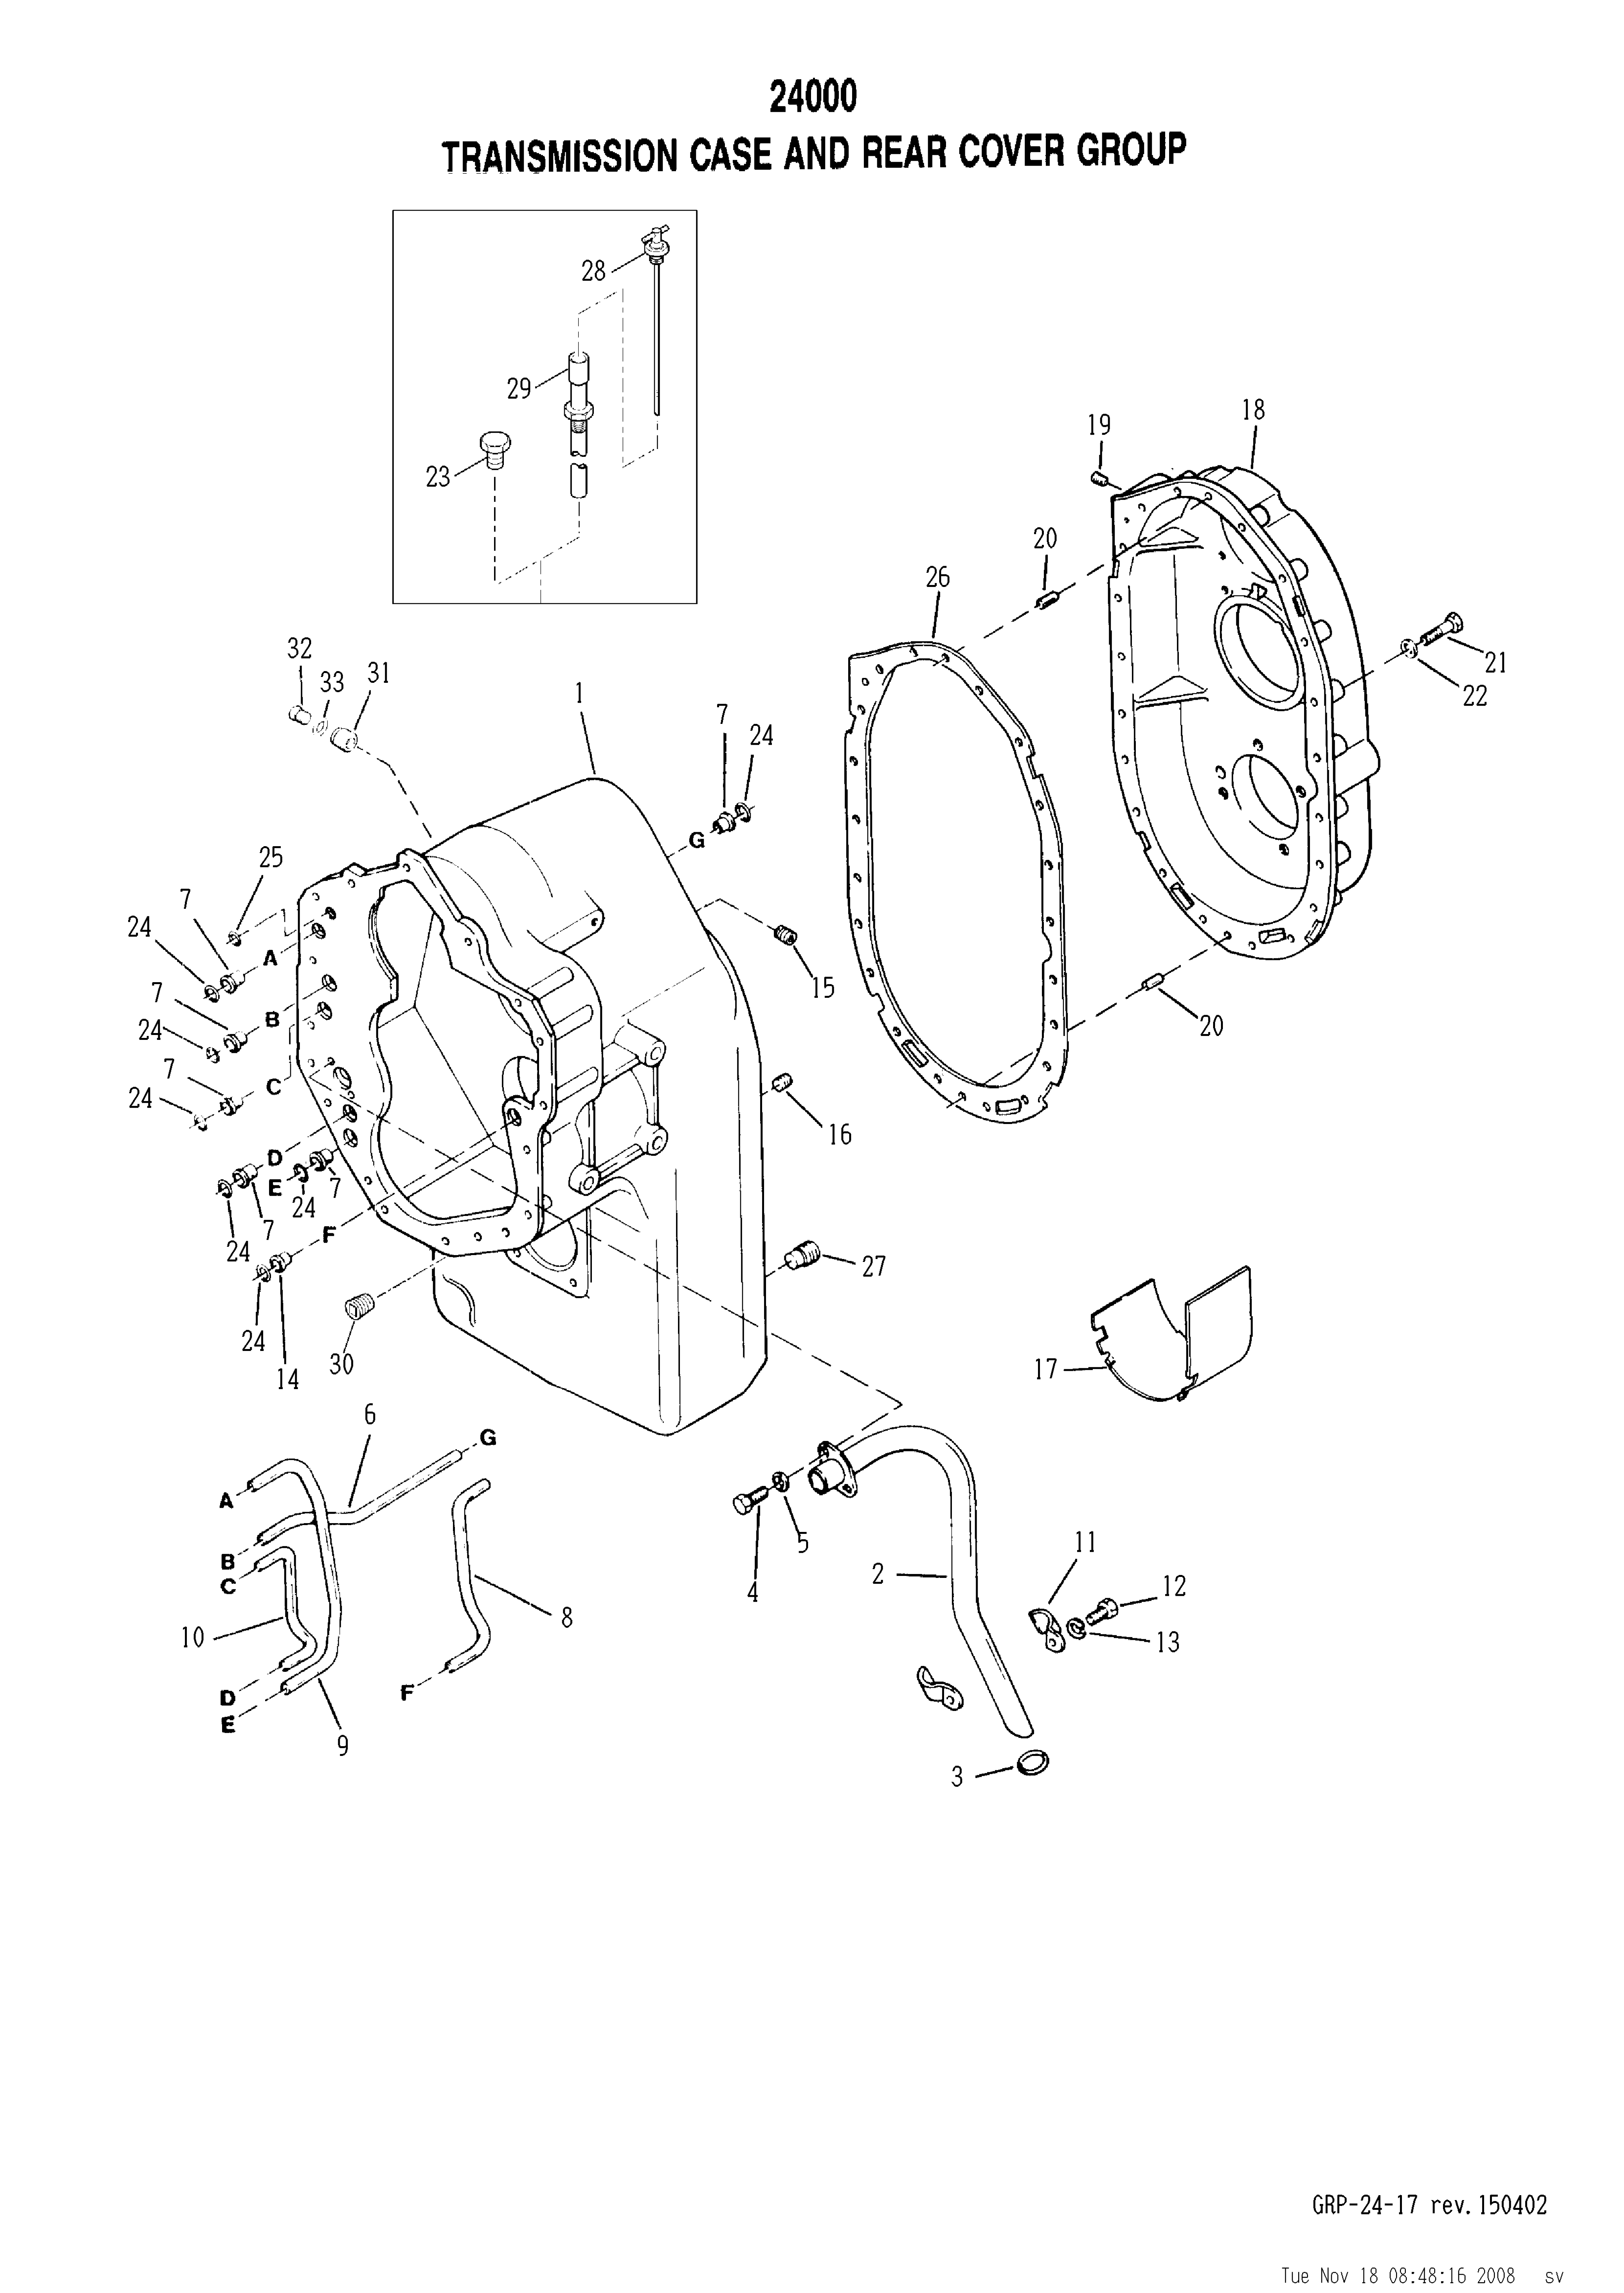 drawing for TELEDYNE SPECIALITY EQUIPMENT 1004235 - DIP STICK